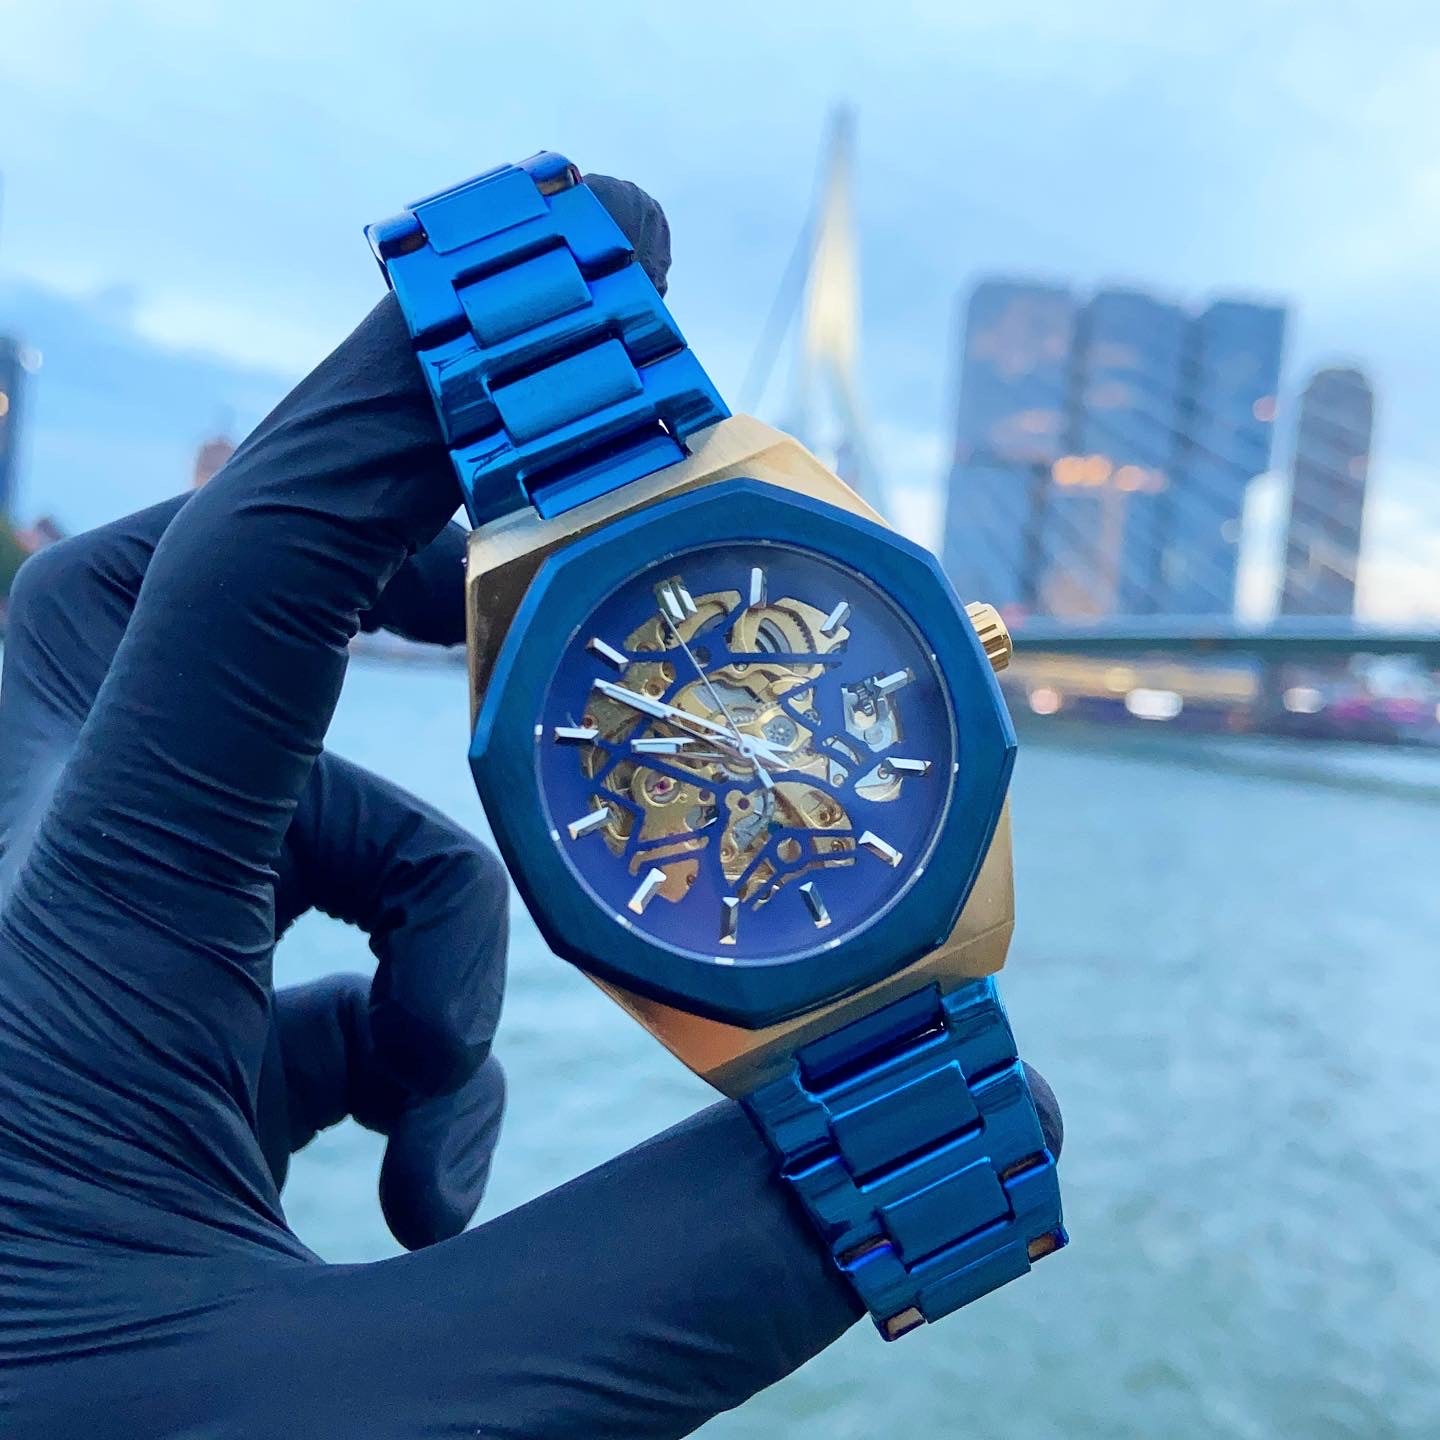 Majesty Watch 40mm - Blue / Gold - Automatic Movement - Sehgal Watches